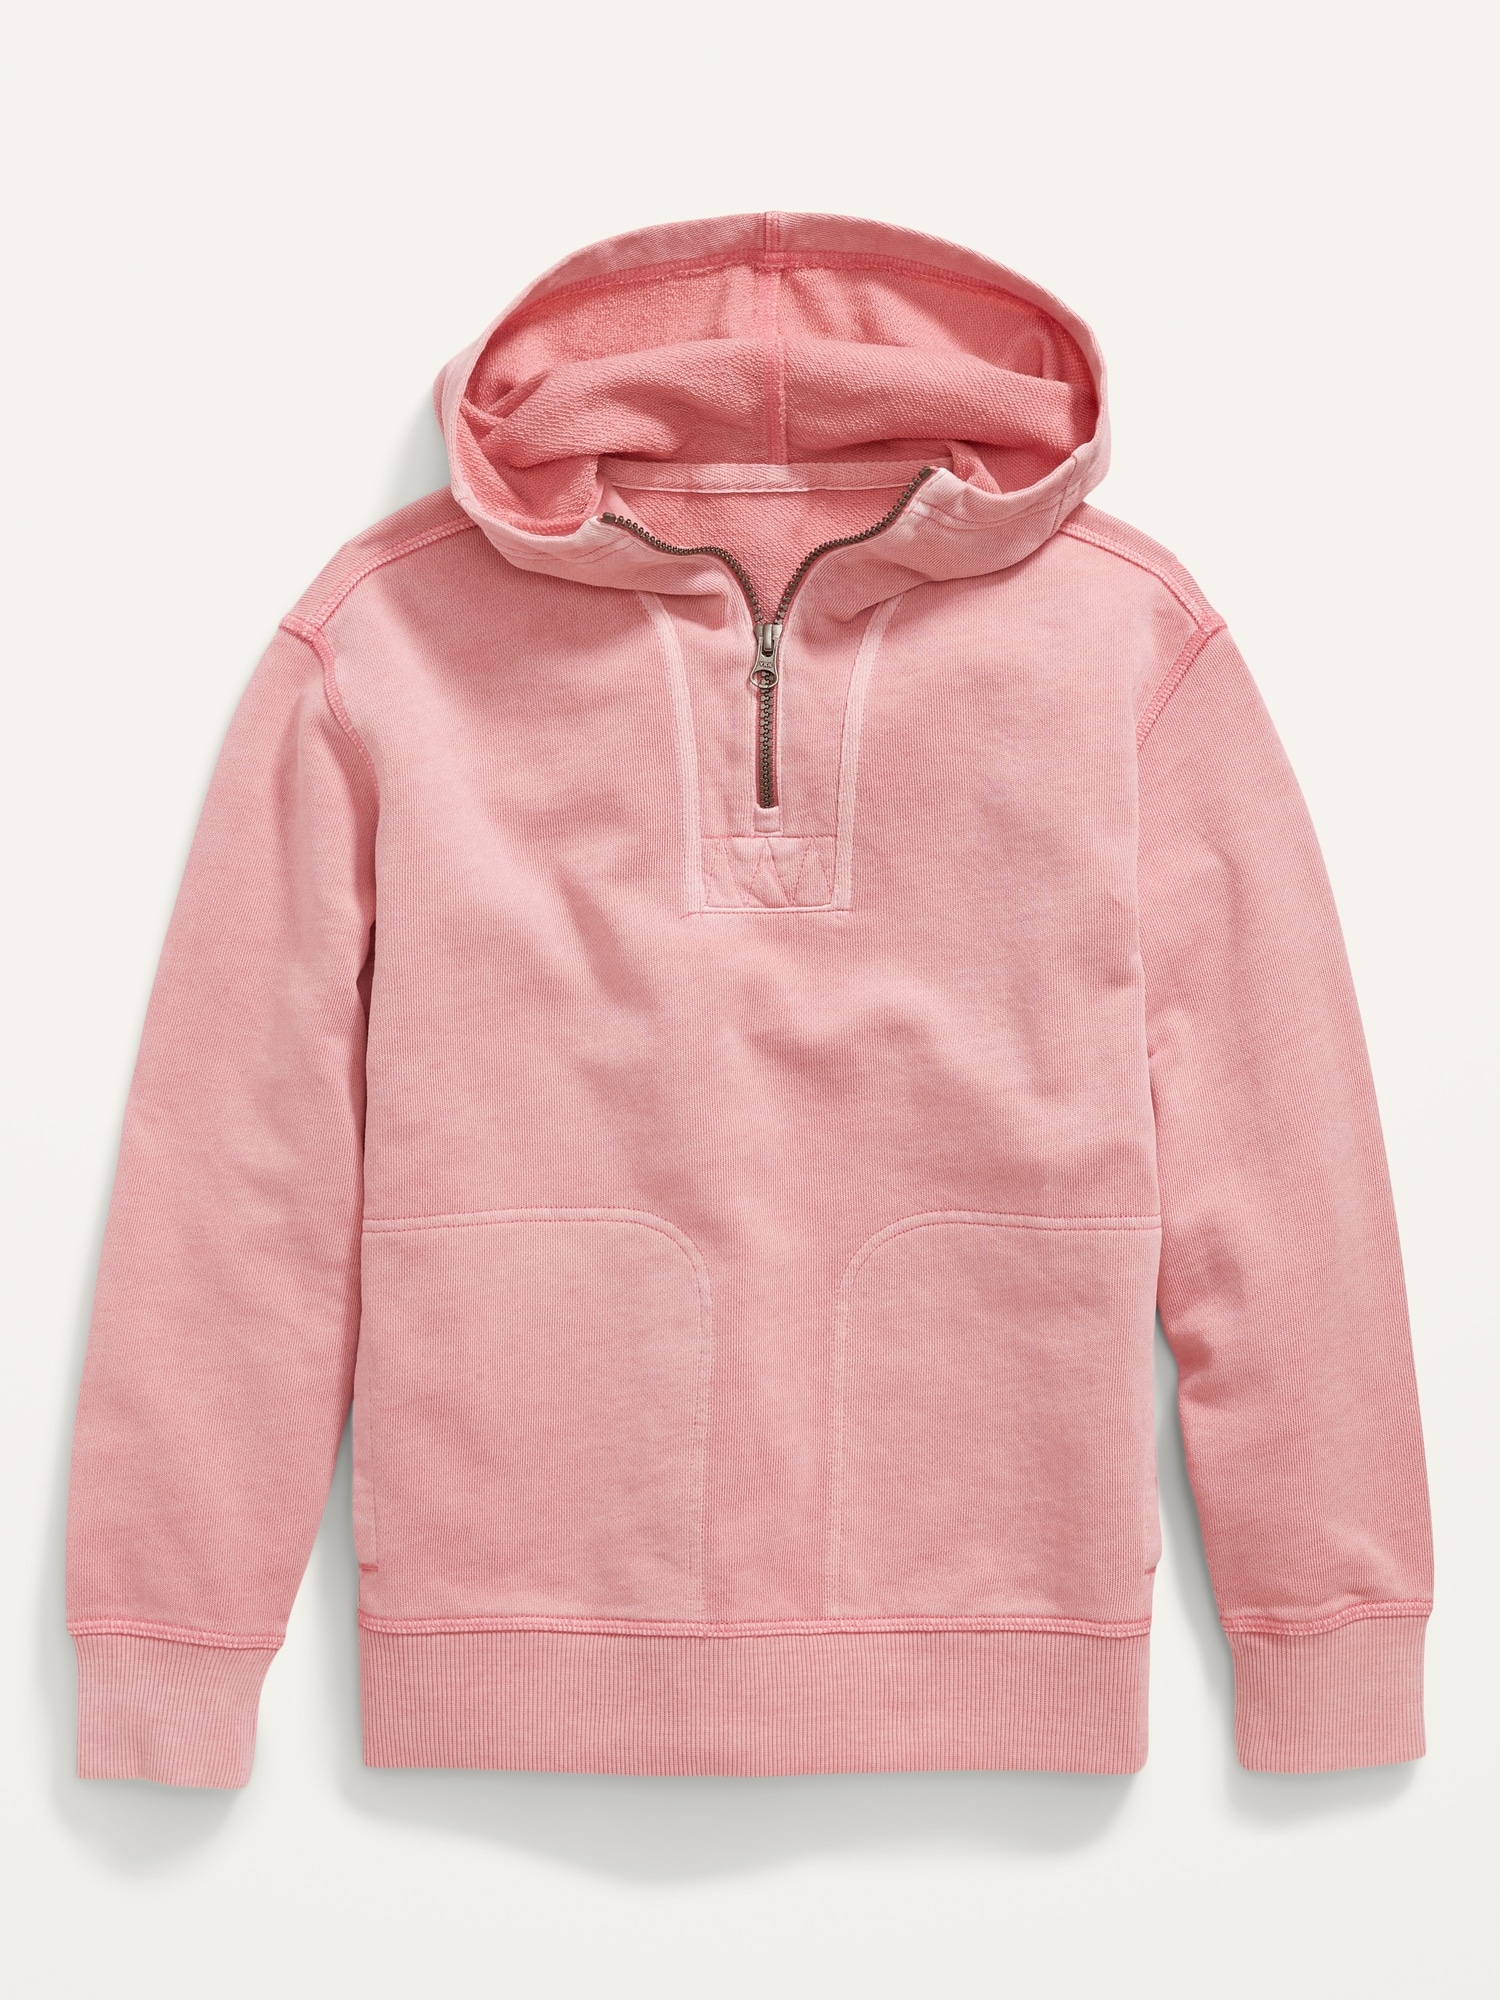 Old Navy French Terry Quarter-Zip Utility Hoodie for Boys pink. 1